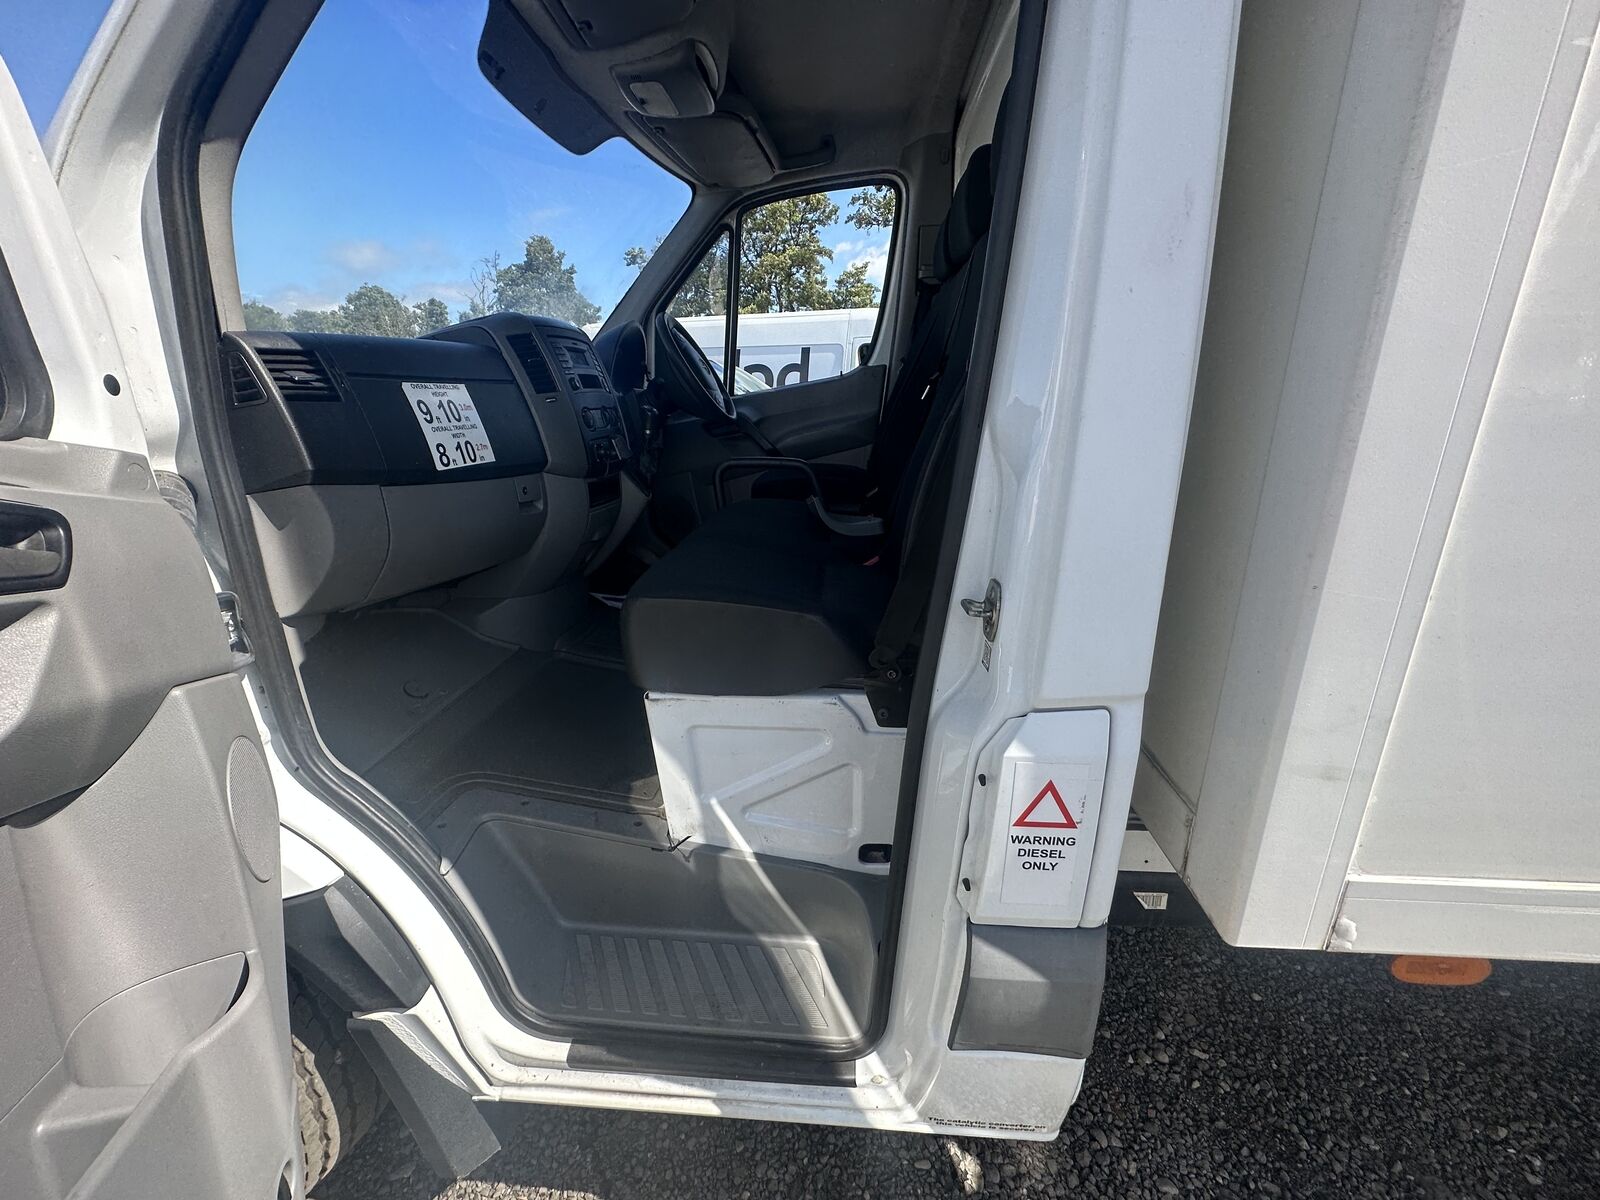 Bid on COLD CARGO KING: 2017 MERCEDES-BENZ SPRINTER 314CDI - DELIVERING FRESHNESS WITH PRECISION- Buy &amp; Sell on Auction with EAMA Group